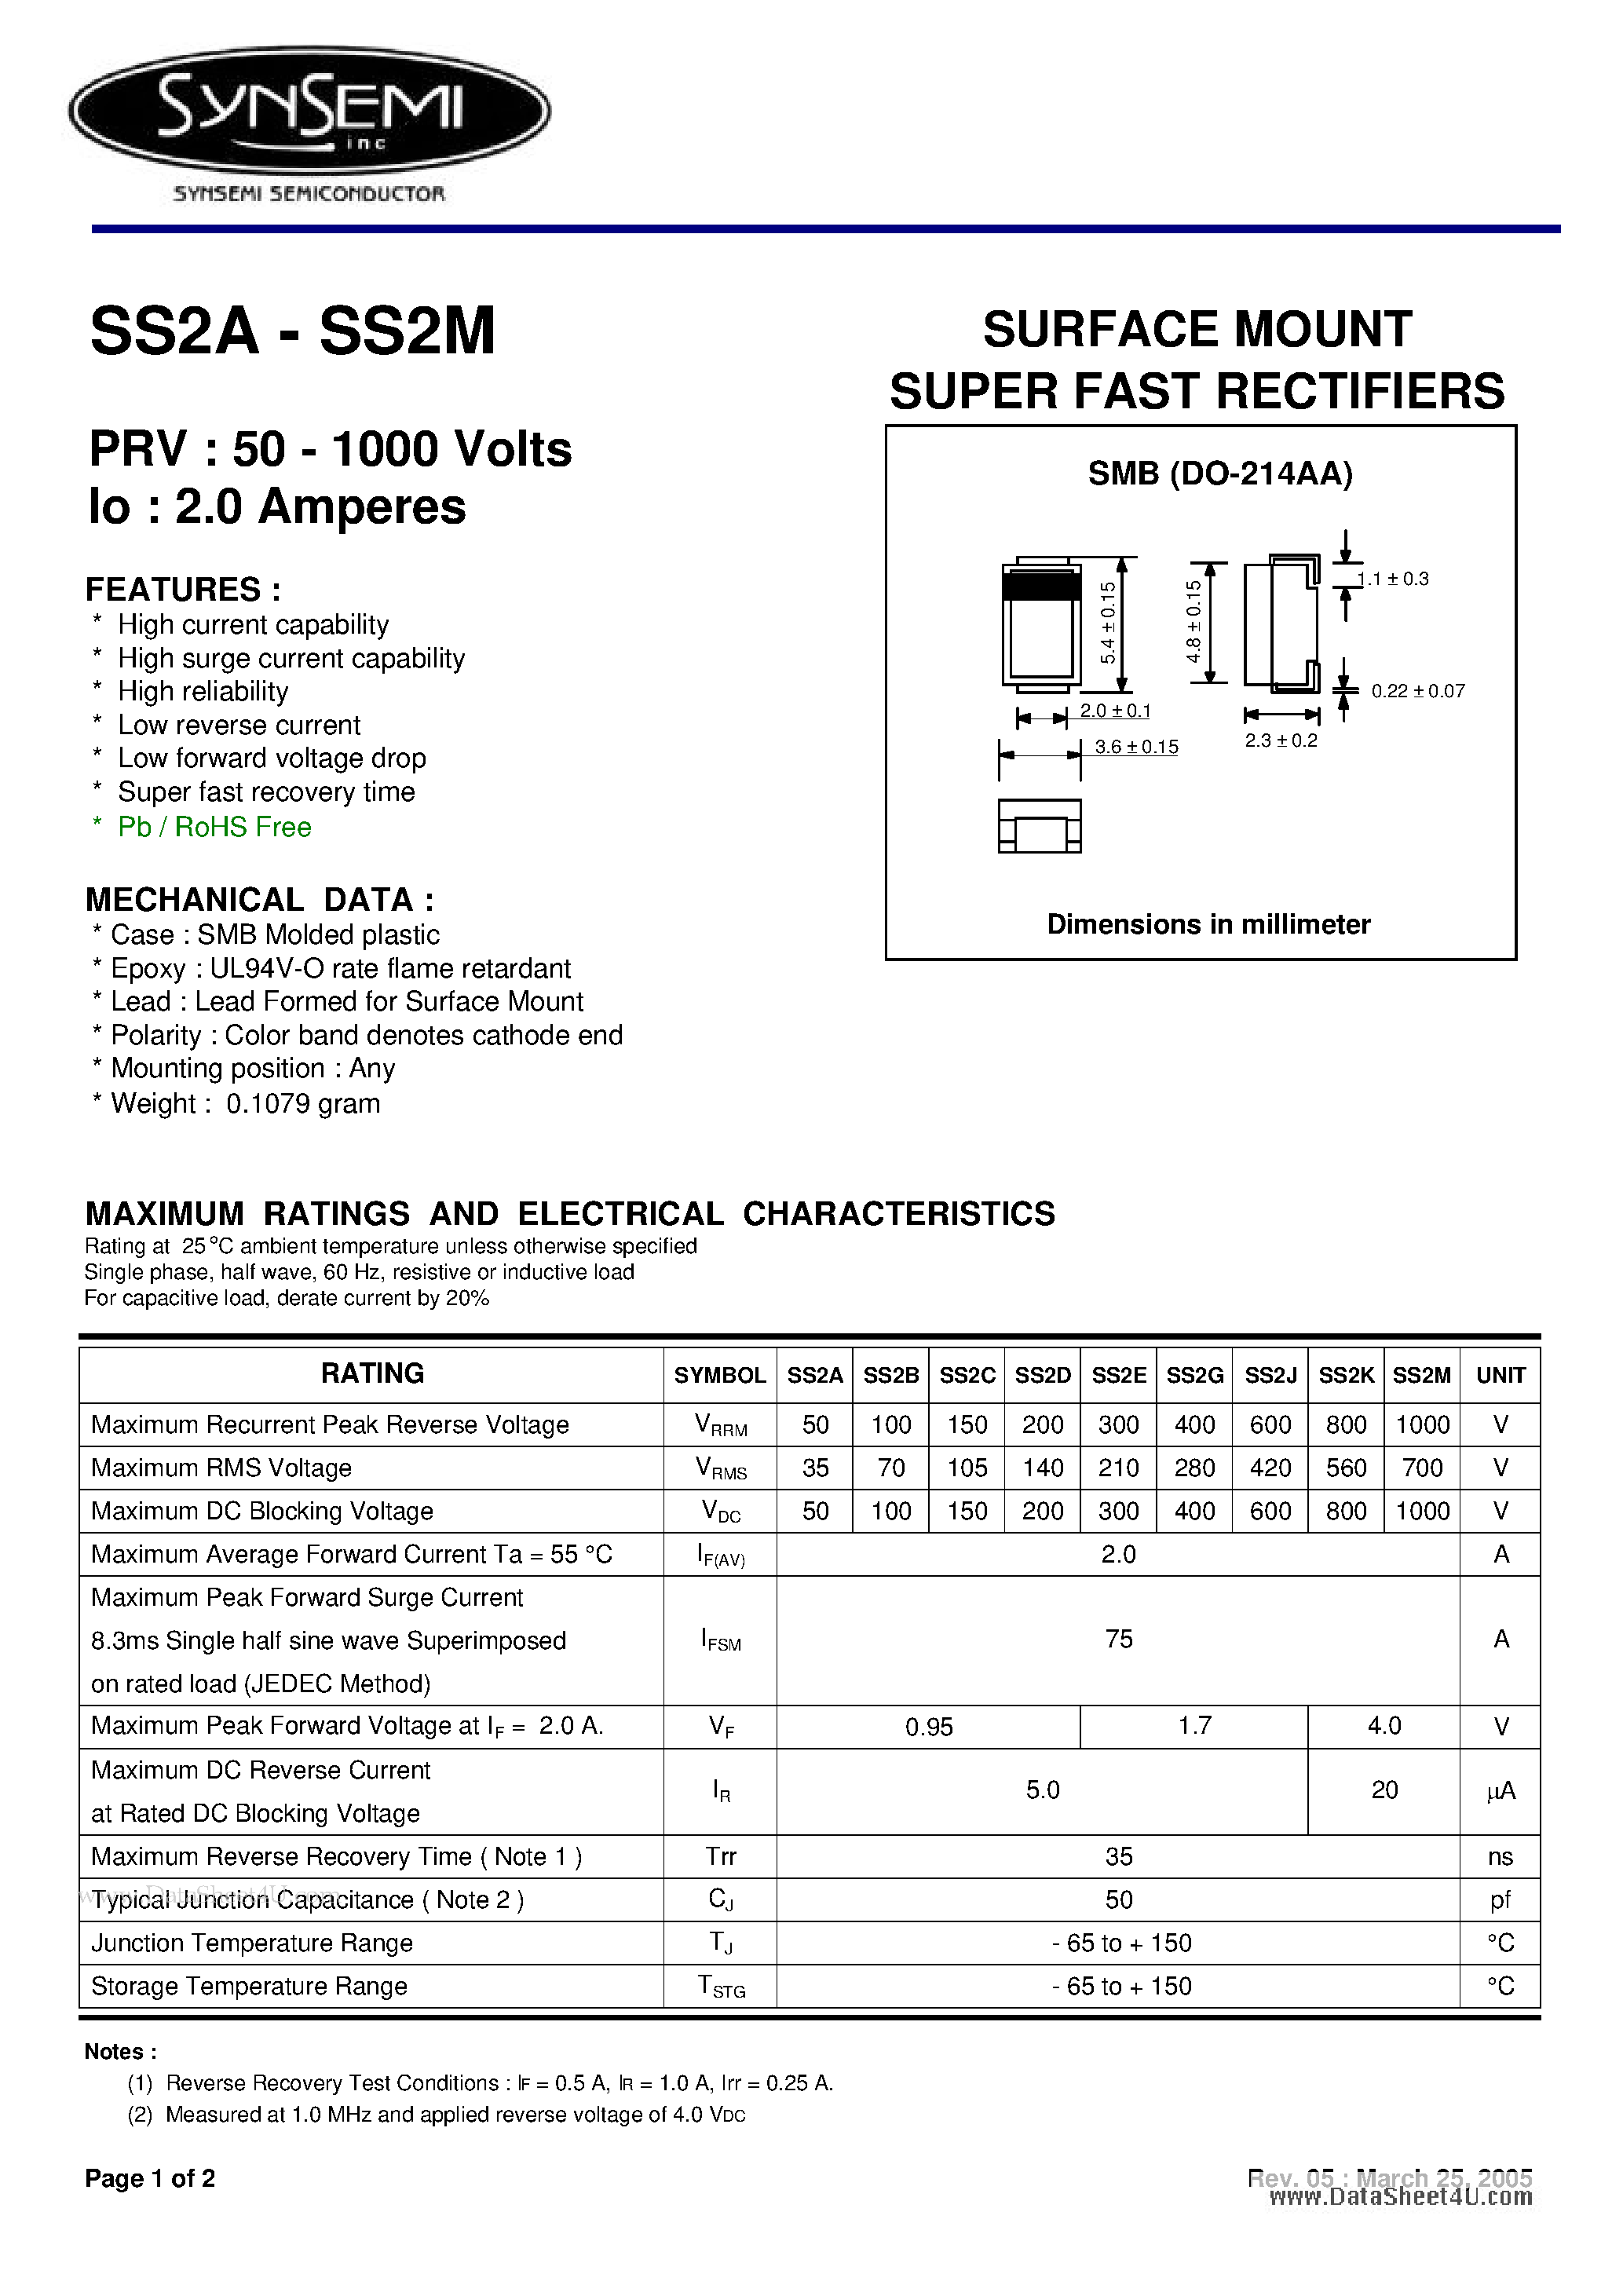 Datasheet SS2A - SURFACE MOUNT SUPER FAST RECTIFIERS page 1